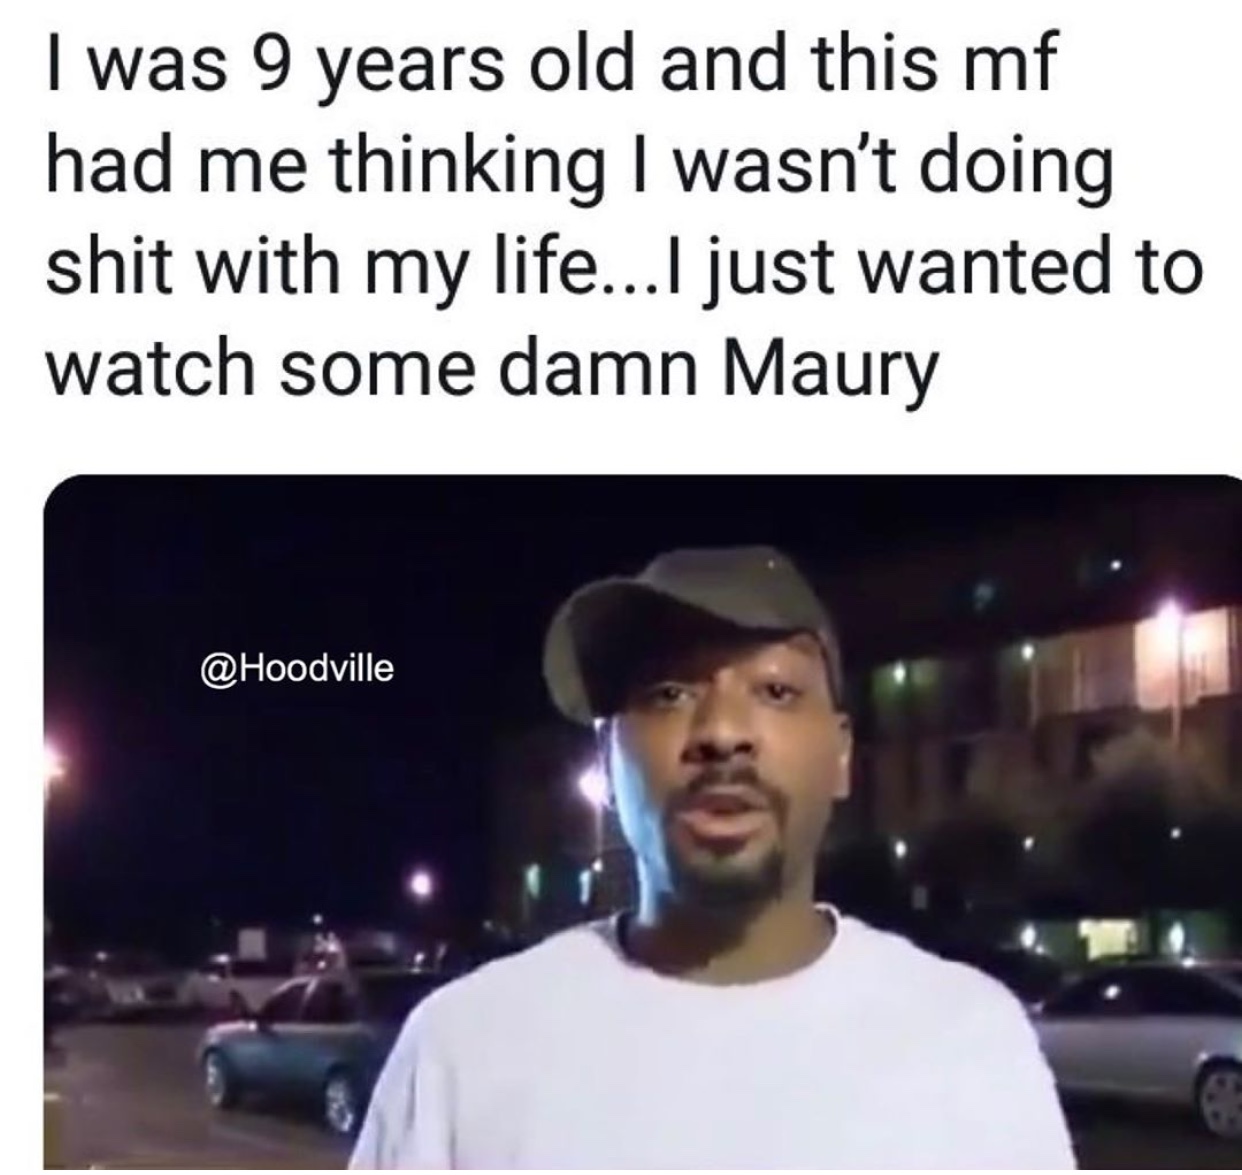 photo caption - I was 9 years old and this mf had me thinking I wasn't doing shit with my life... I just wanted to watch some damn Maury